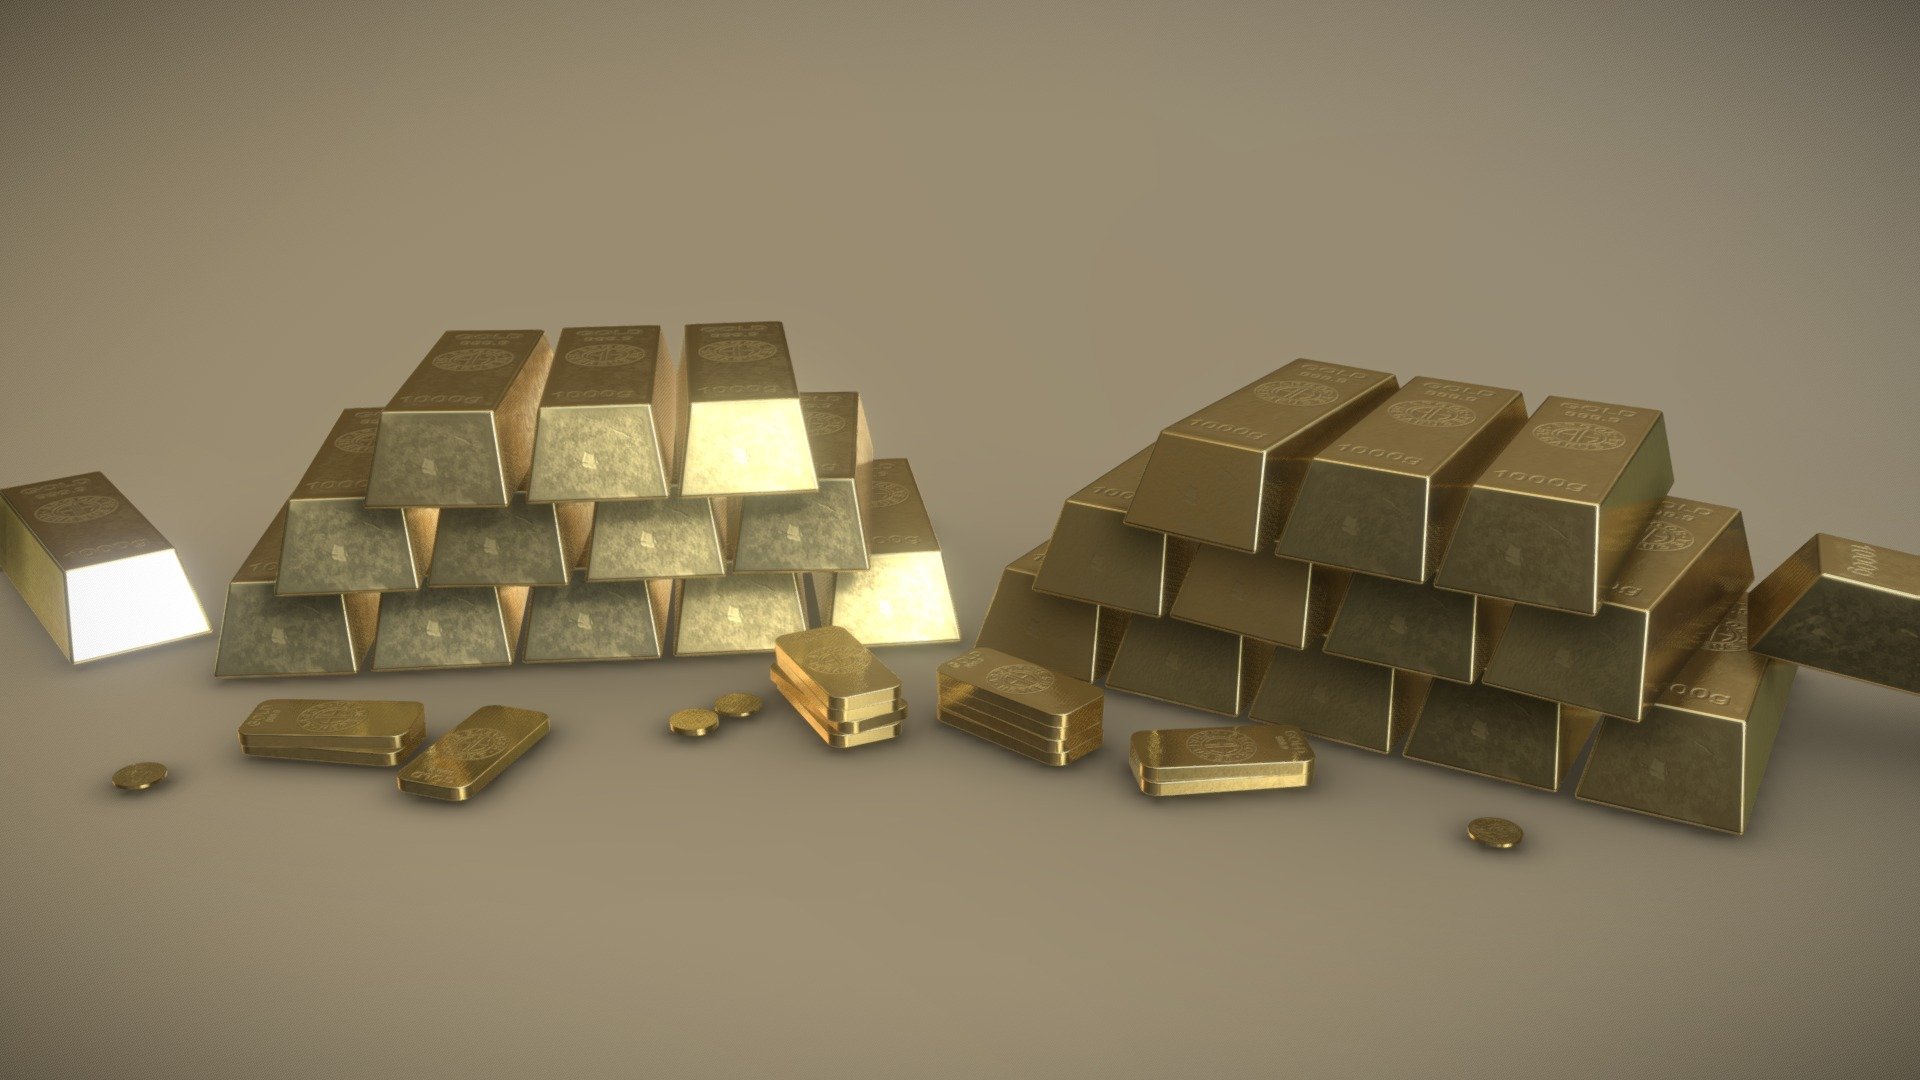 PBR



FBX AND PNG FORMAT



Textures

.4k



7 Materials



Assets for free use

Dont forget to download the additional File - Ingots - Buy Royalty Free 3D model by Zambur 3d model